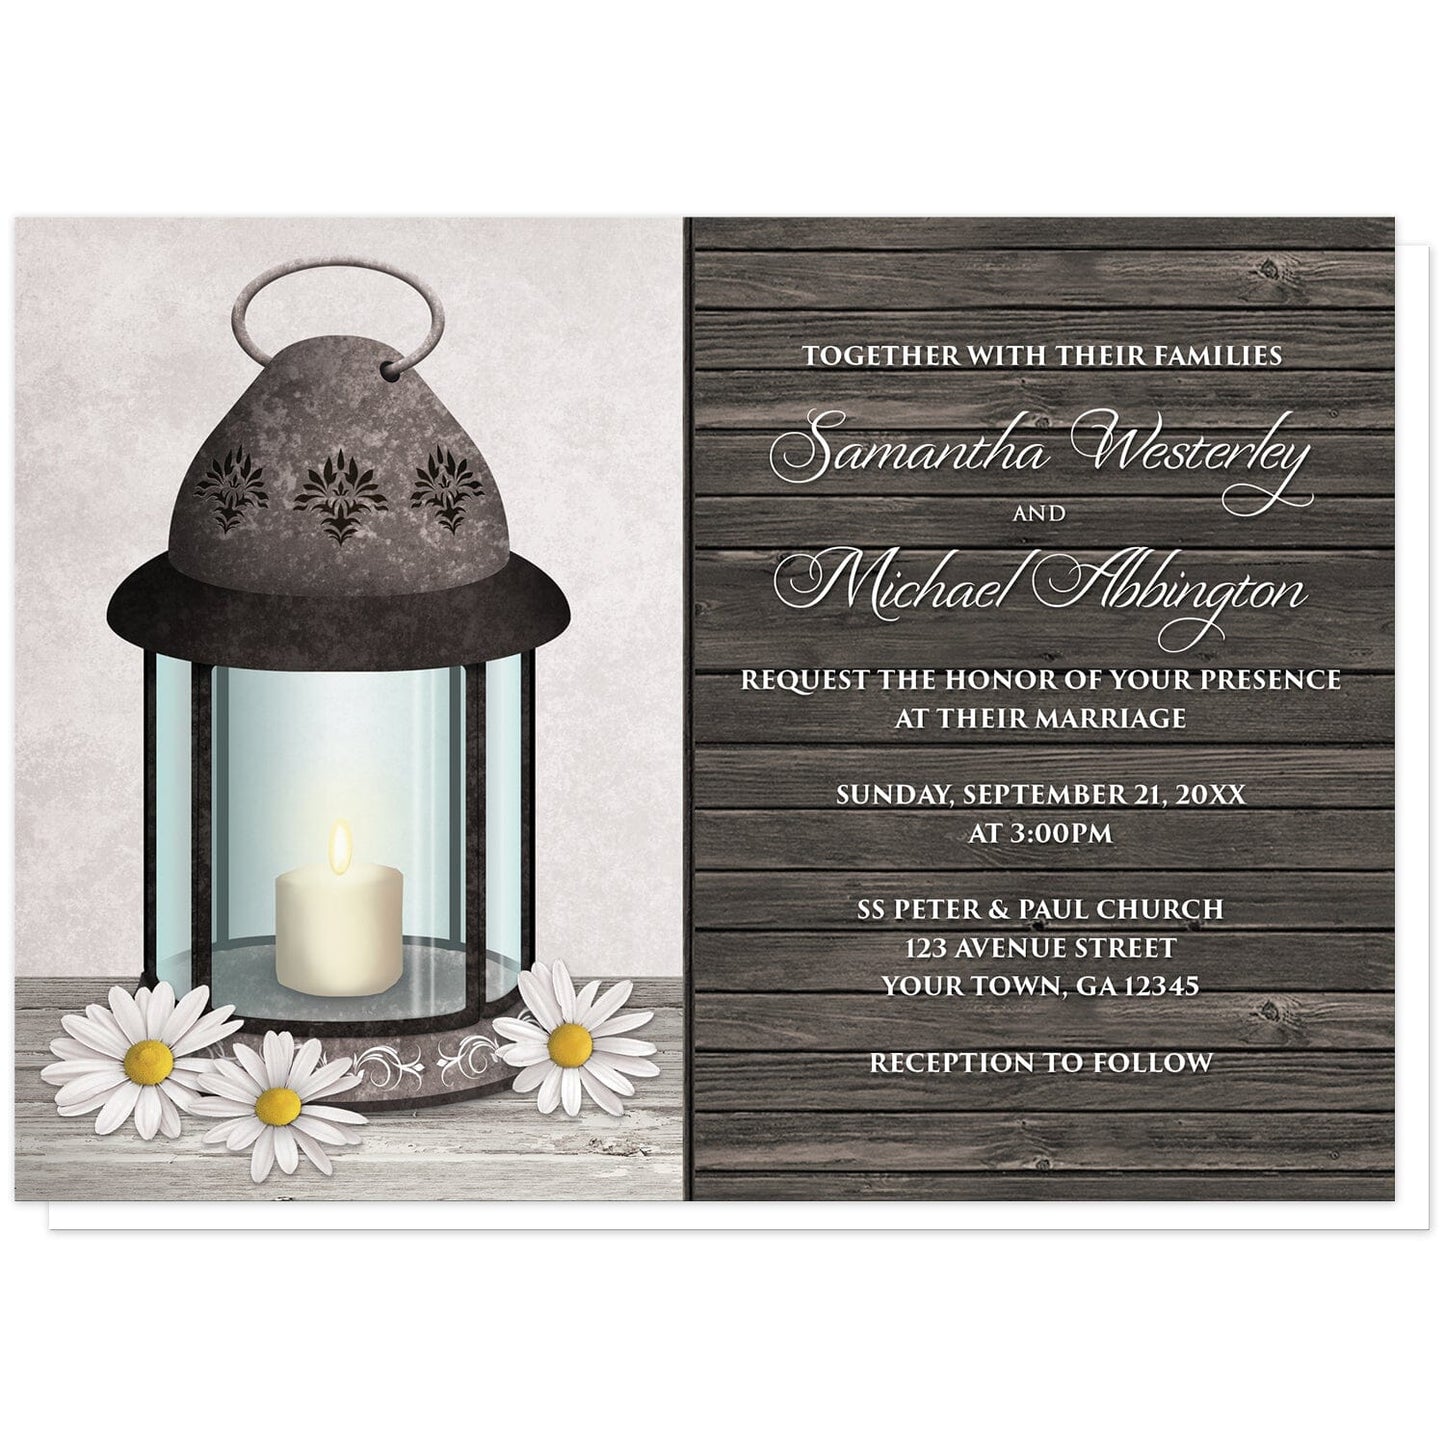 Rustic Daisy Lantern Wood Wedding Invitations at Artistically Invited. Country-inspired rustic daisy lantern wood wedding invitations with an old rustic but elegant ornate metal lantern illustration with a lit candle inside, daisies around it on a light wood tabletop, in front of a rustic light gray parchment background on the left side of the invitations. You personalized marriage celebration details are custom printed in white over a dark wood pattern on the right side.